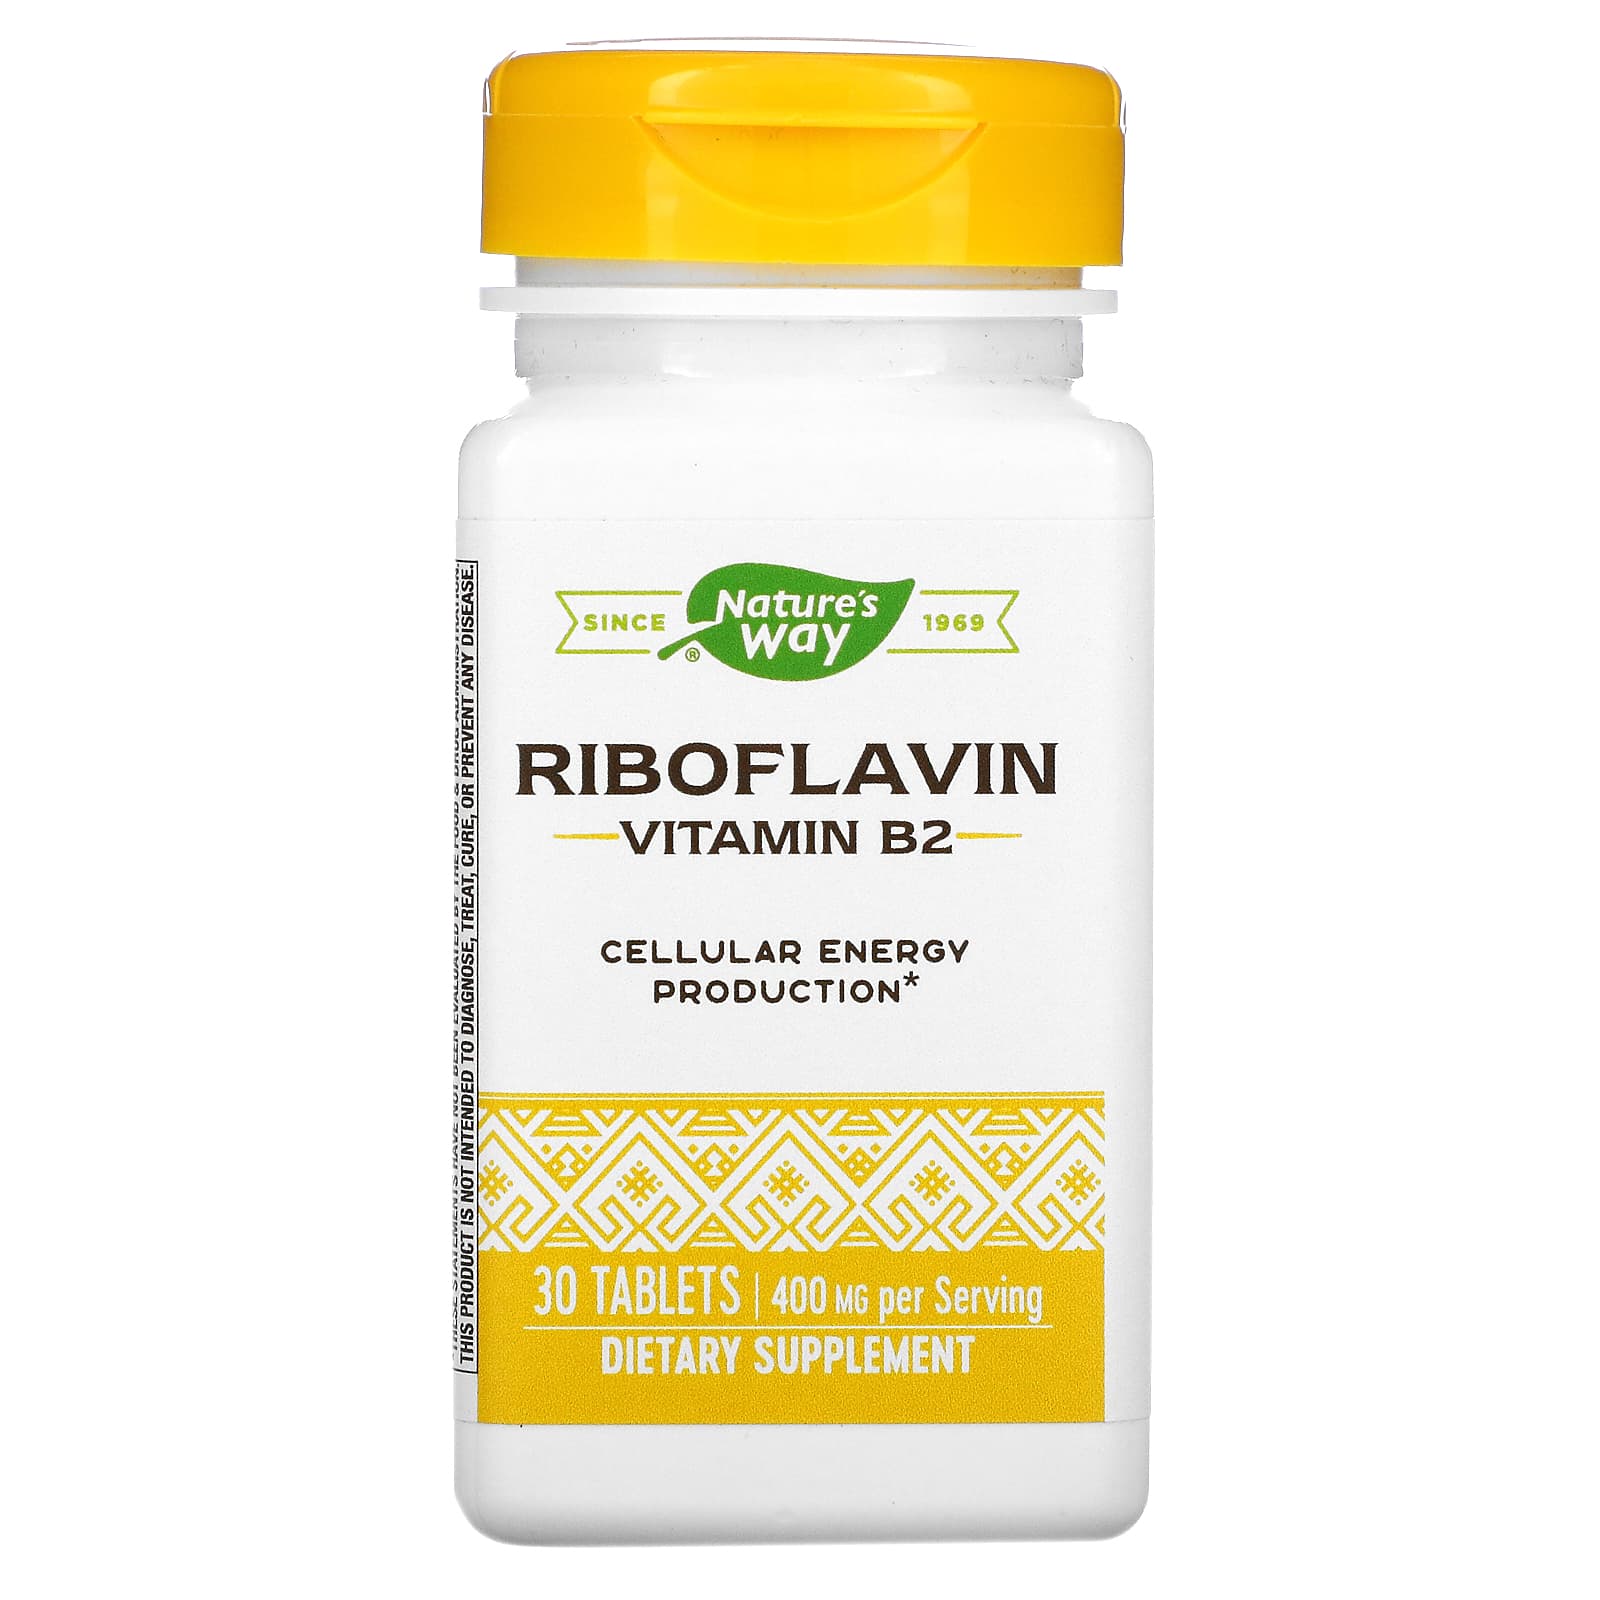 Enzymatic Therapy Nature's Way Riboflavin Vitamin B2 -- 400 Mg - 30 Tablets